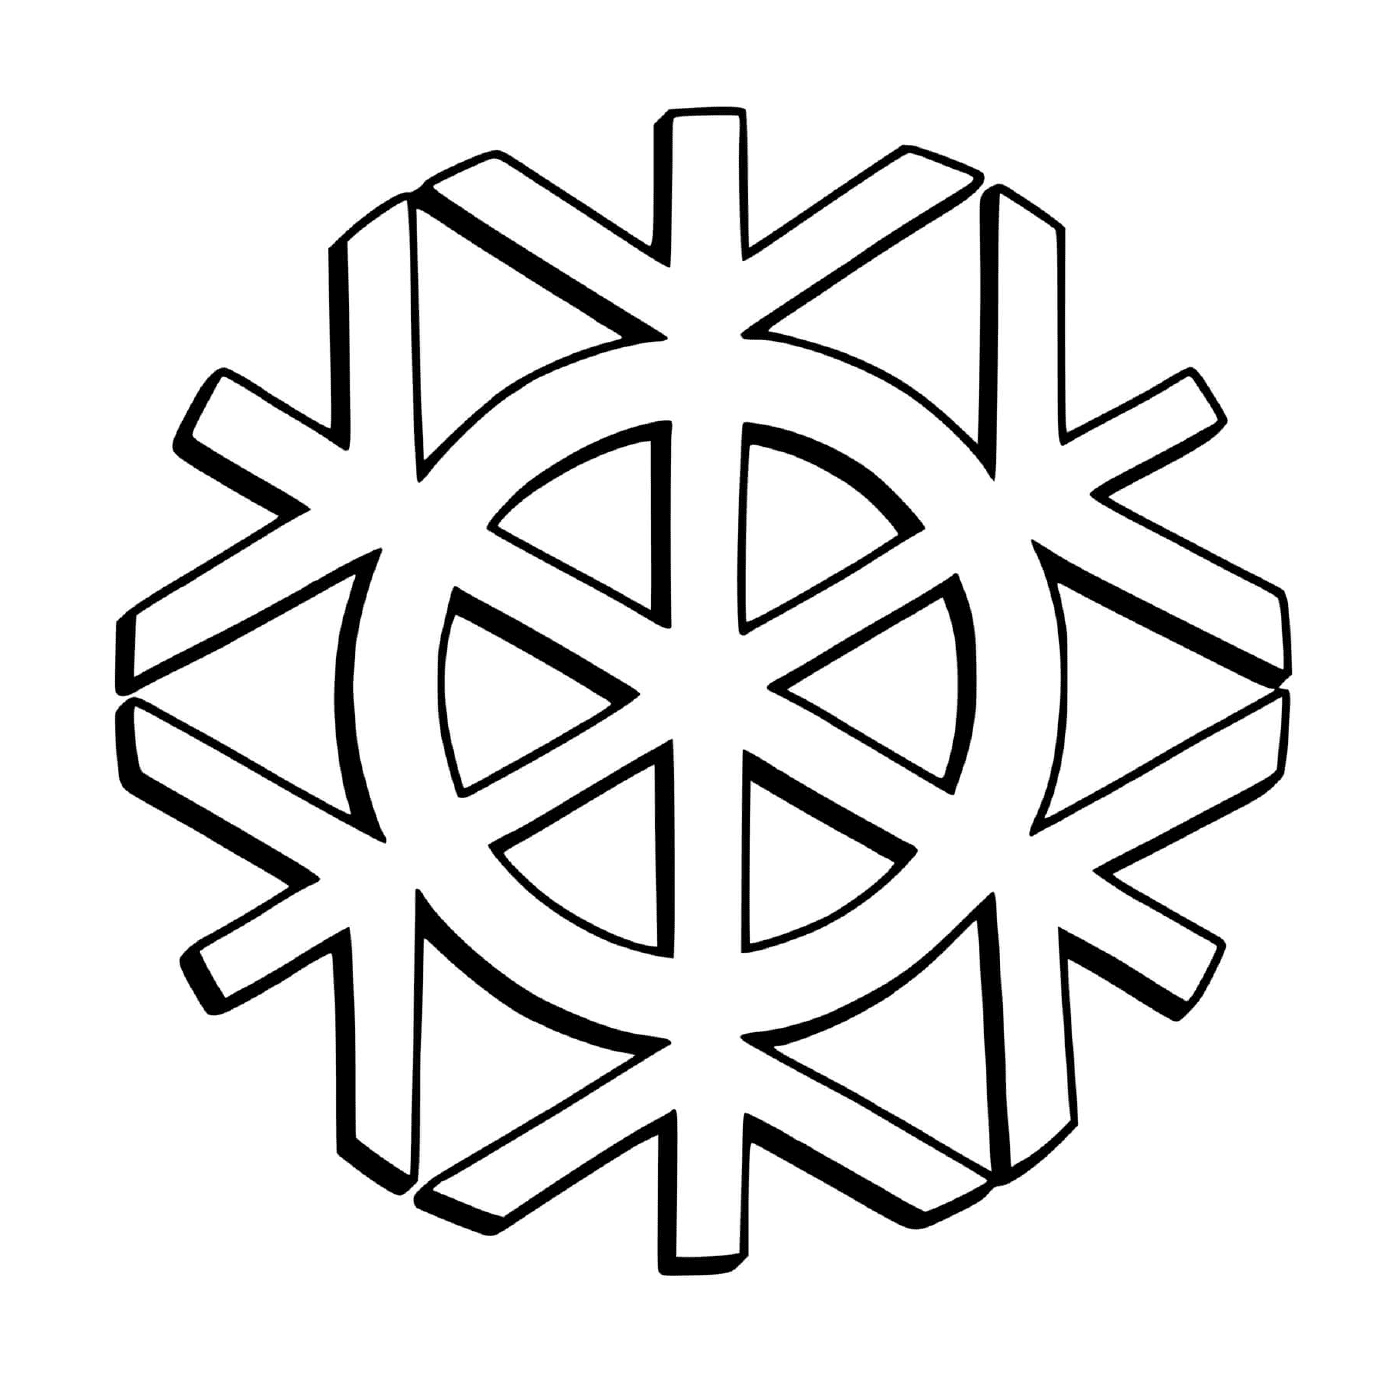  Snowflake sign of peace 